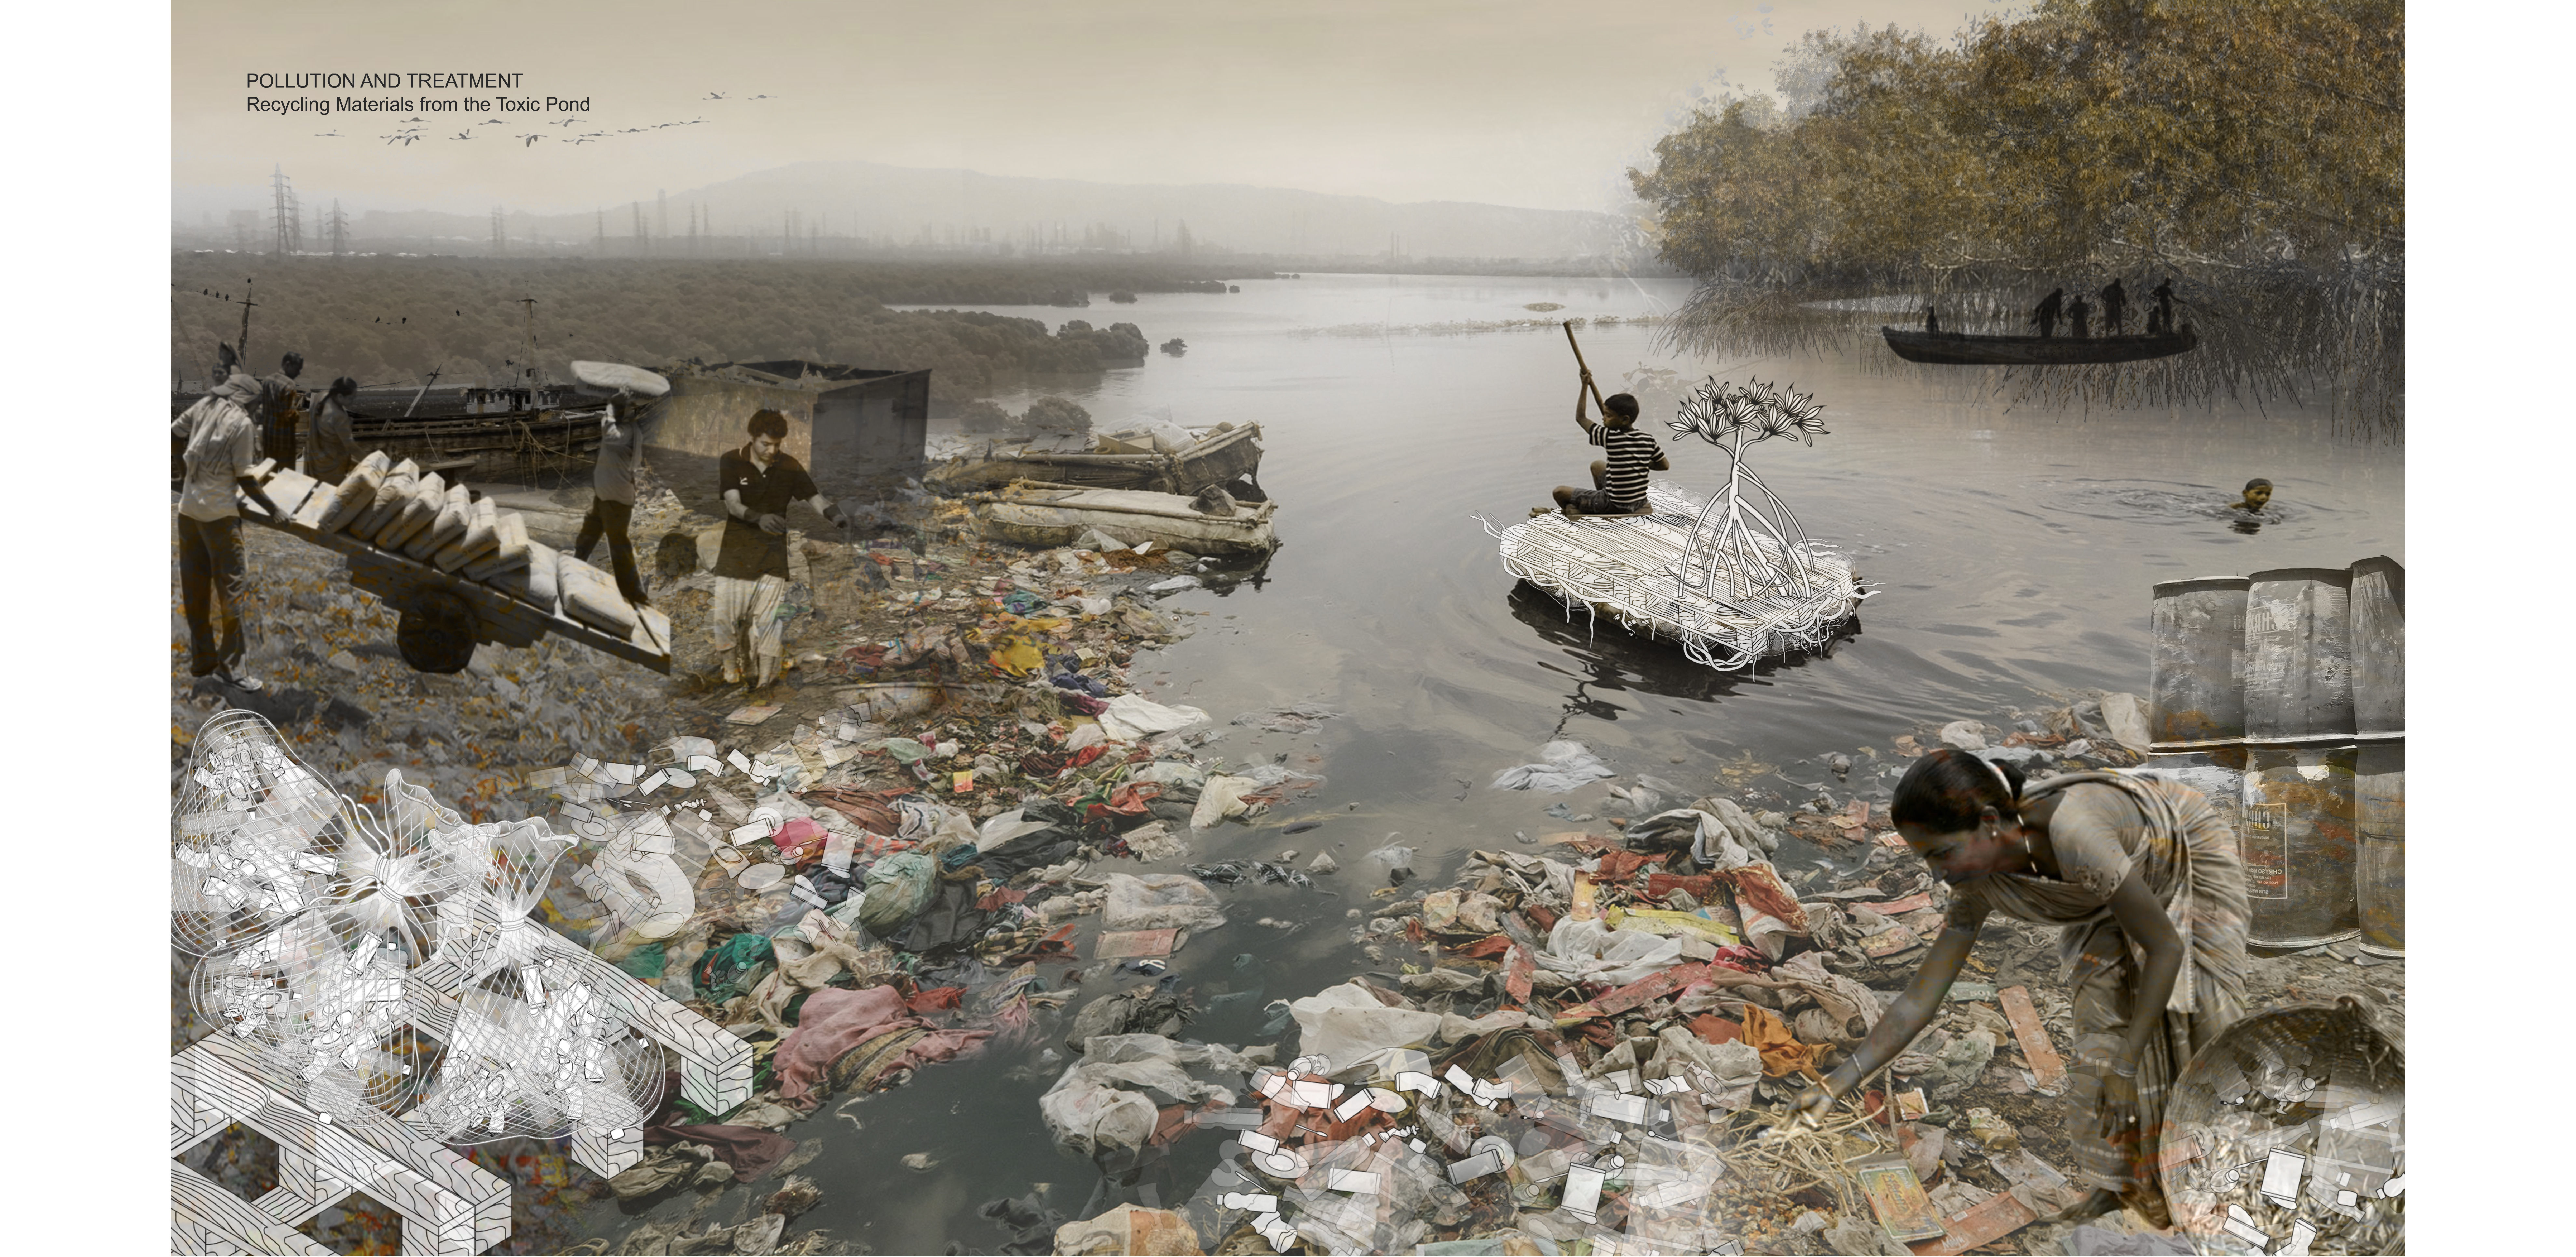 Pollution and Treatment: Recycling Materials from the Toxic Pond